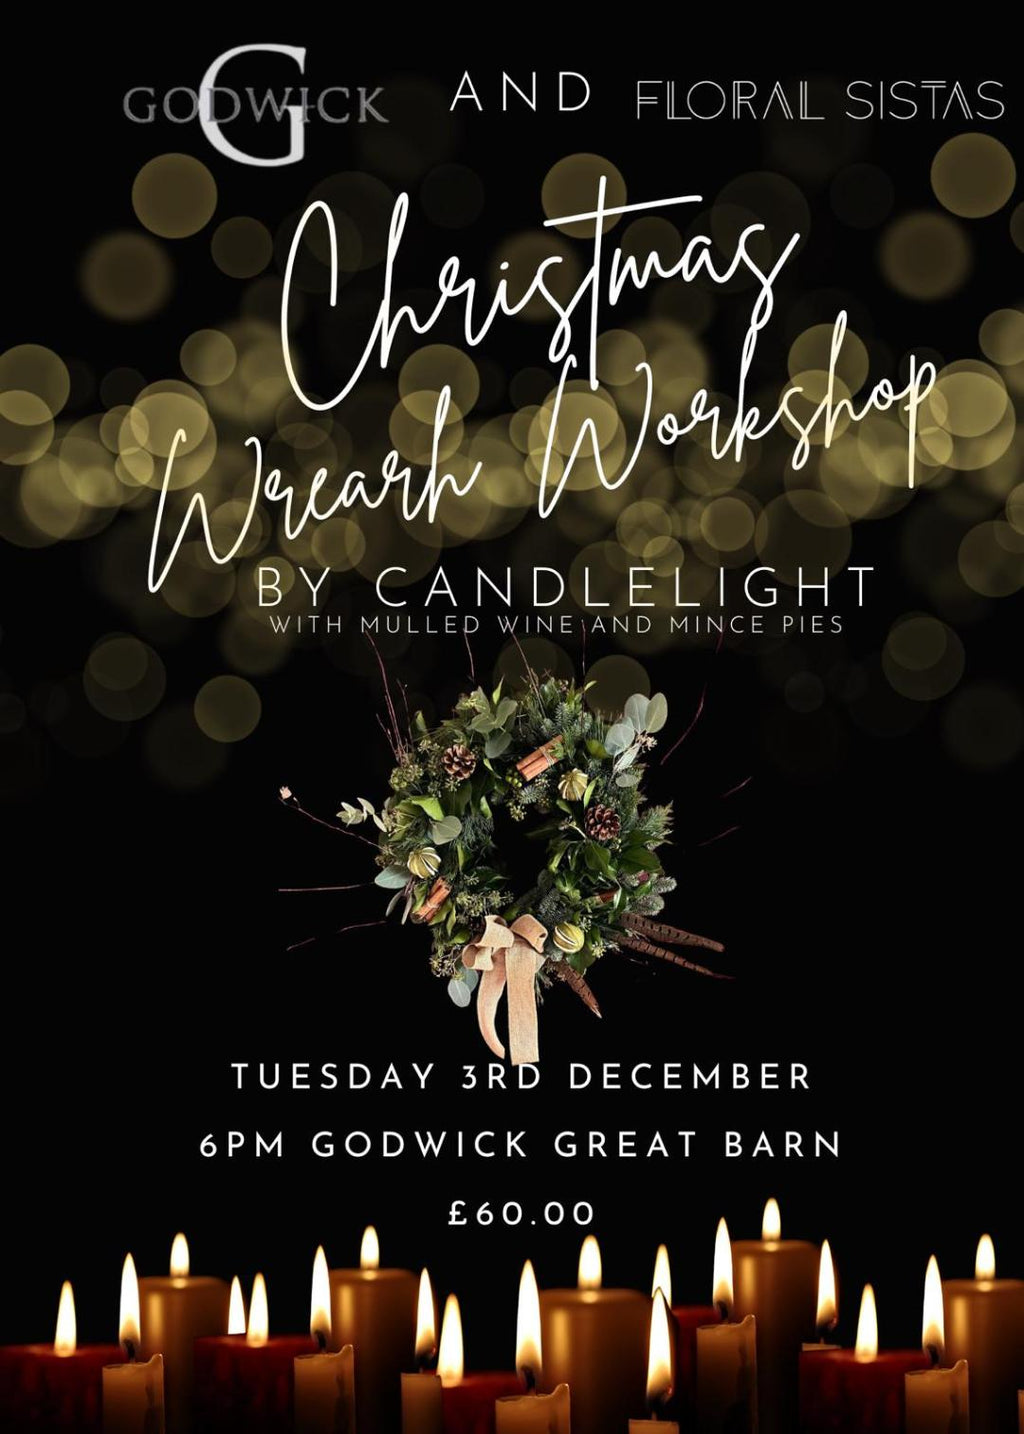 Tue 3rd Dec 6pm Wreath making by Candlelight at Godwick Great Barn